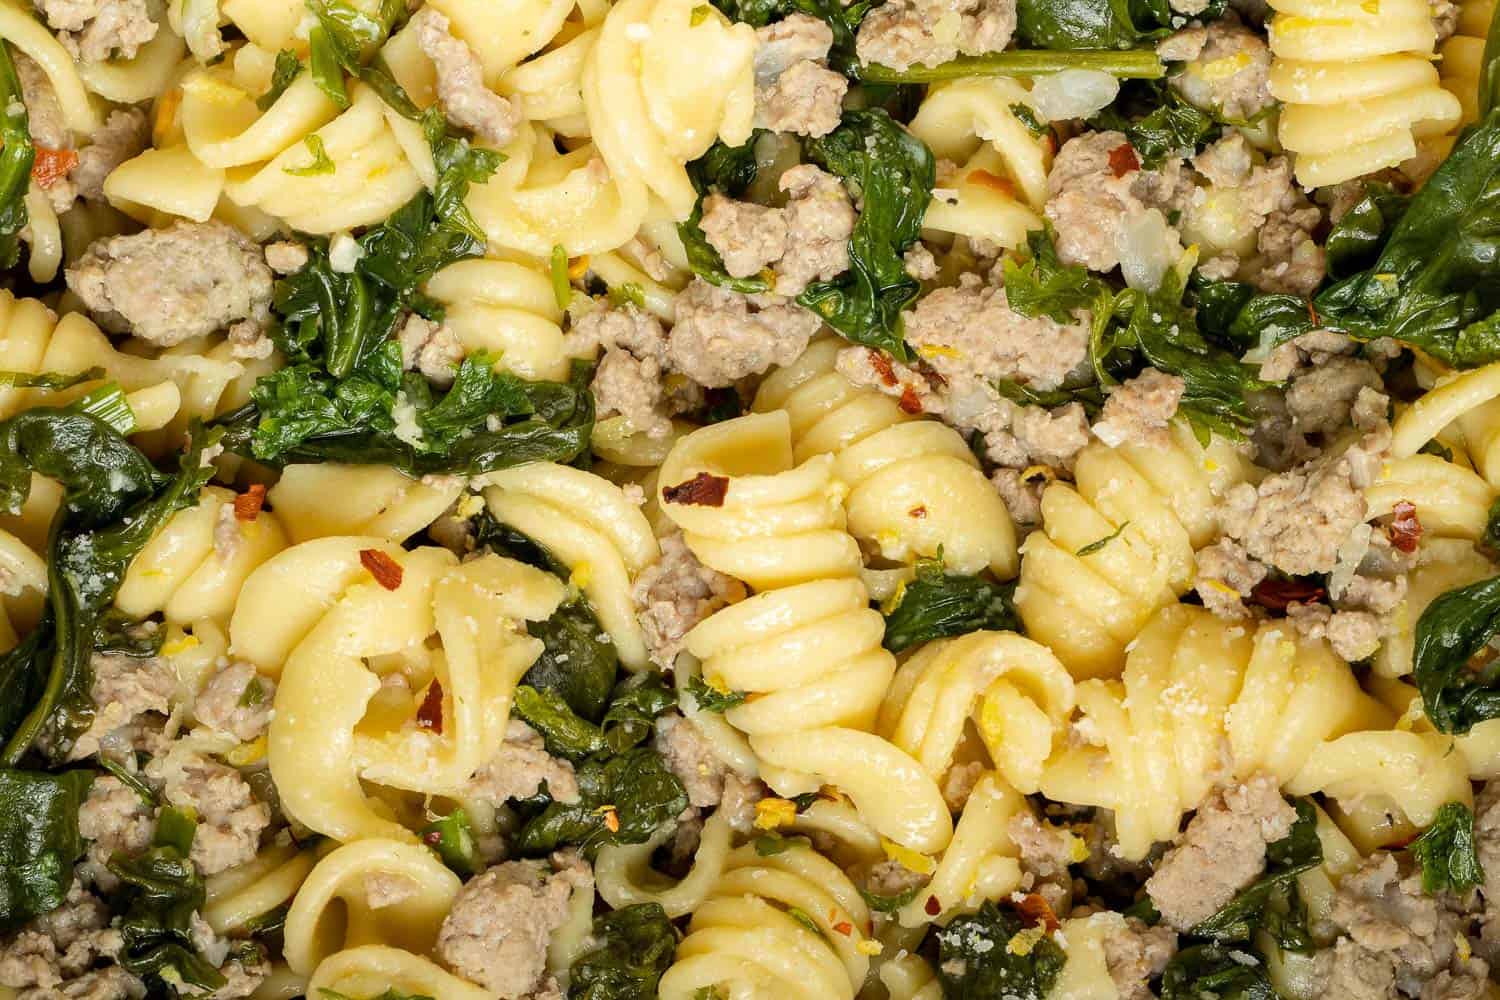 Very close up view of pasta with ground chicken, lemon, spinach, red pepper flakes.